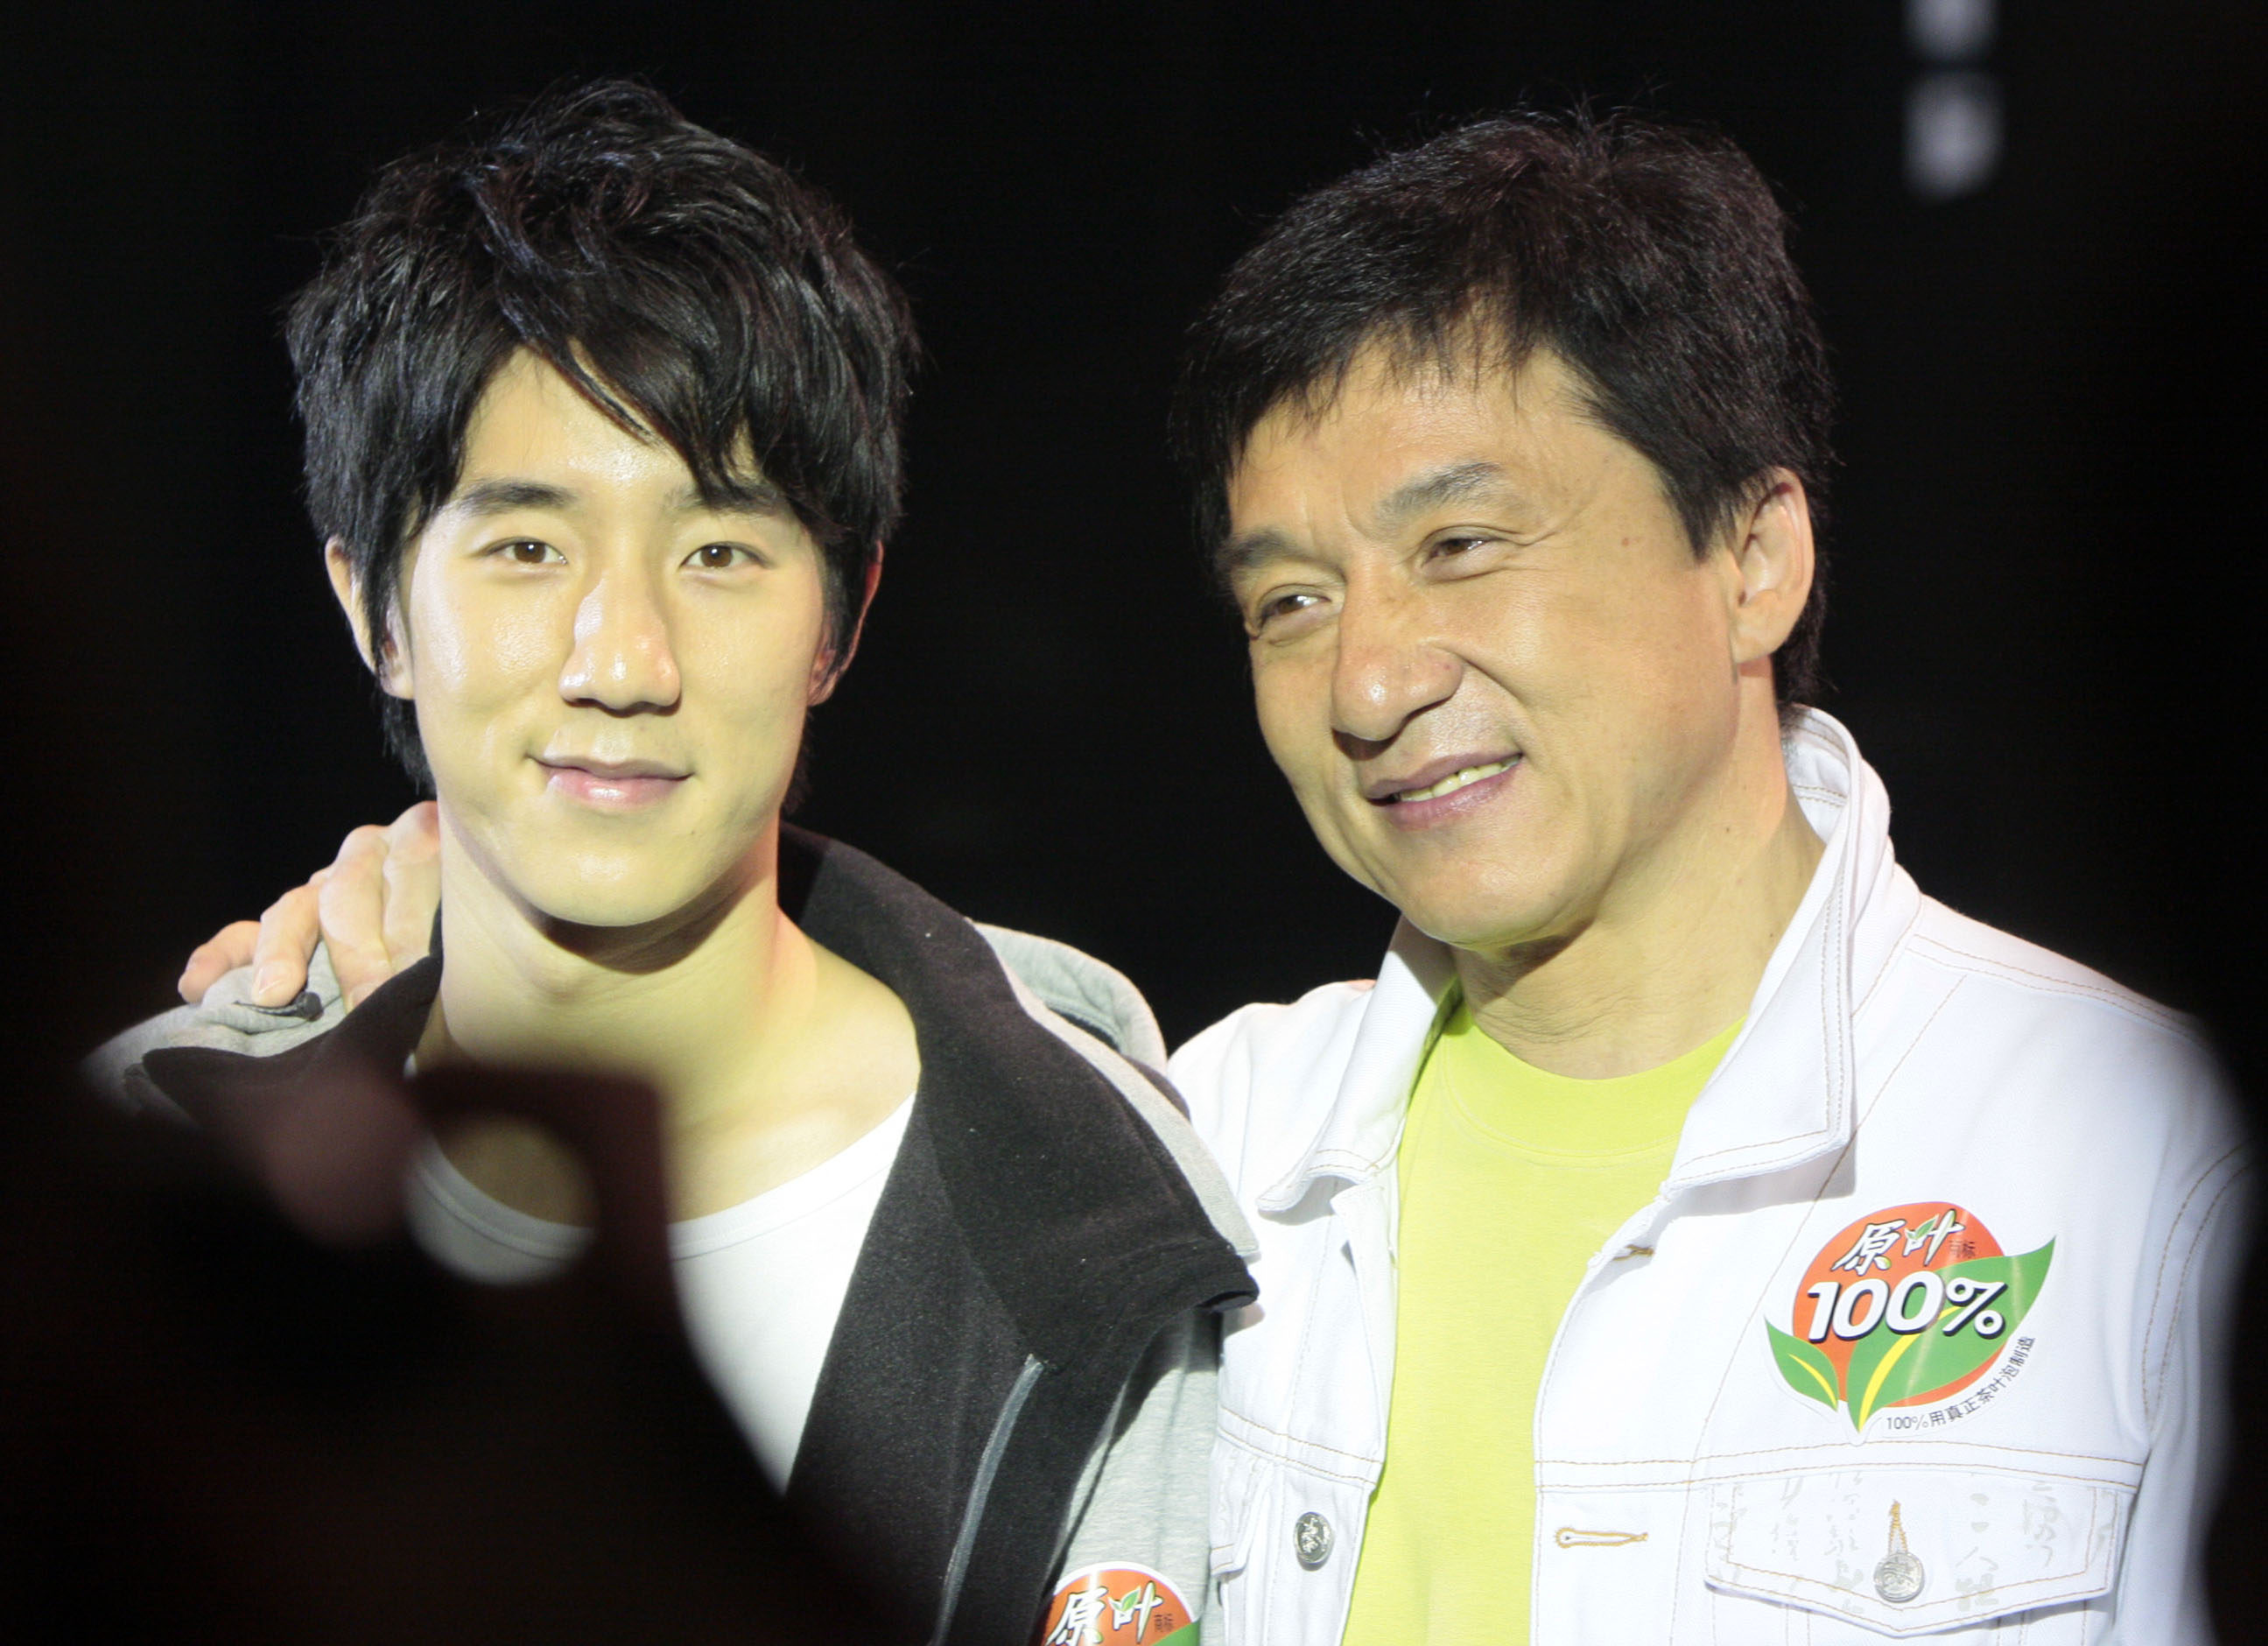 Jackie Chan and his son Jaycee Chan attends a commercial event on April 5, 2008, in Shanghai (ChinaFotoPress/Getty Images)